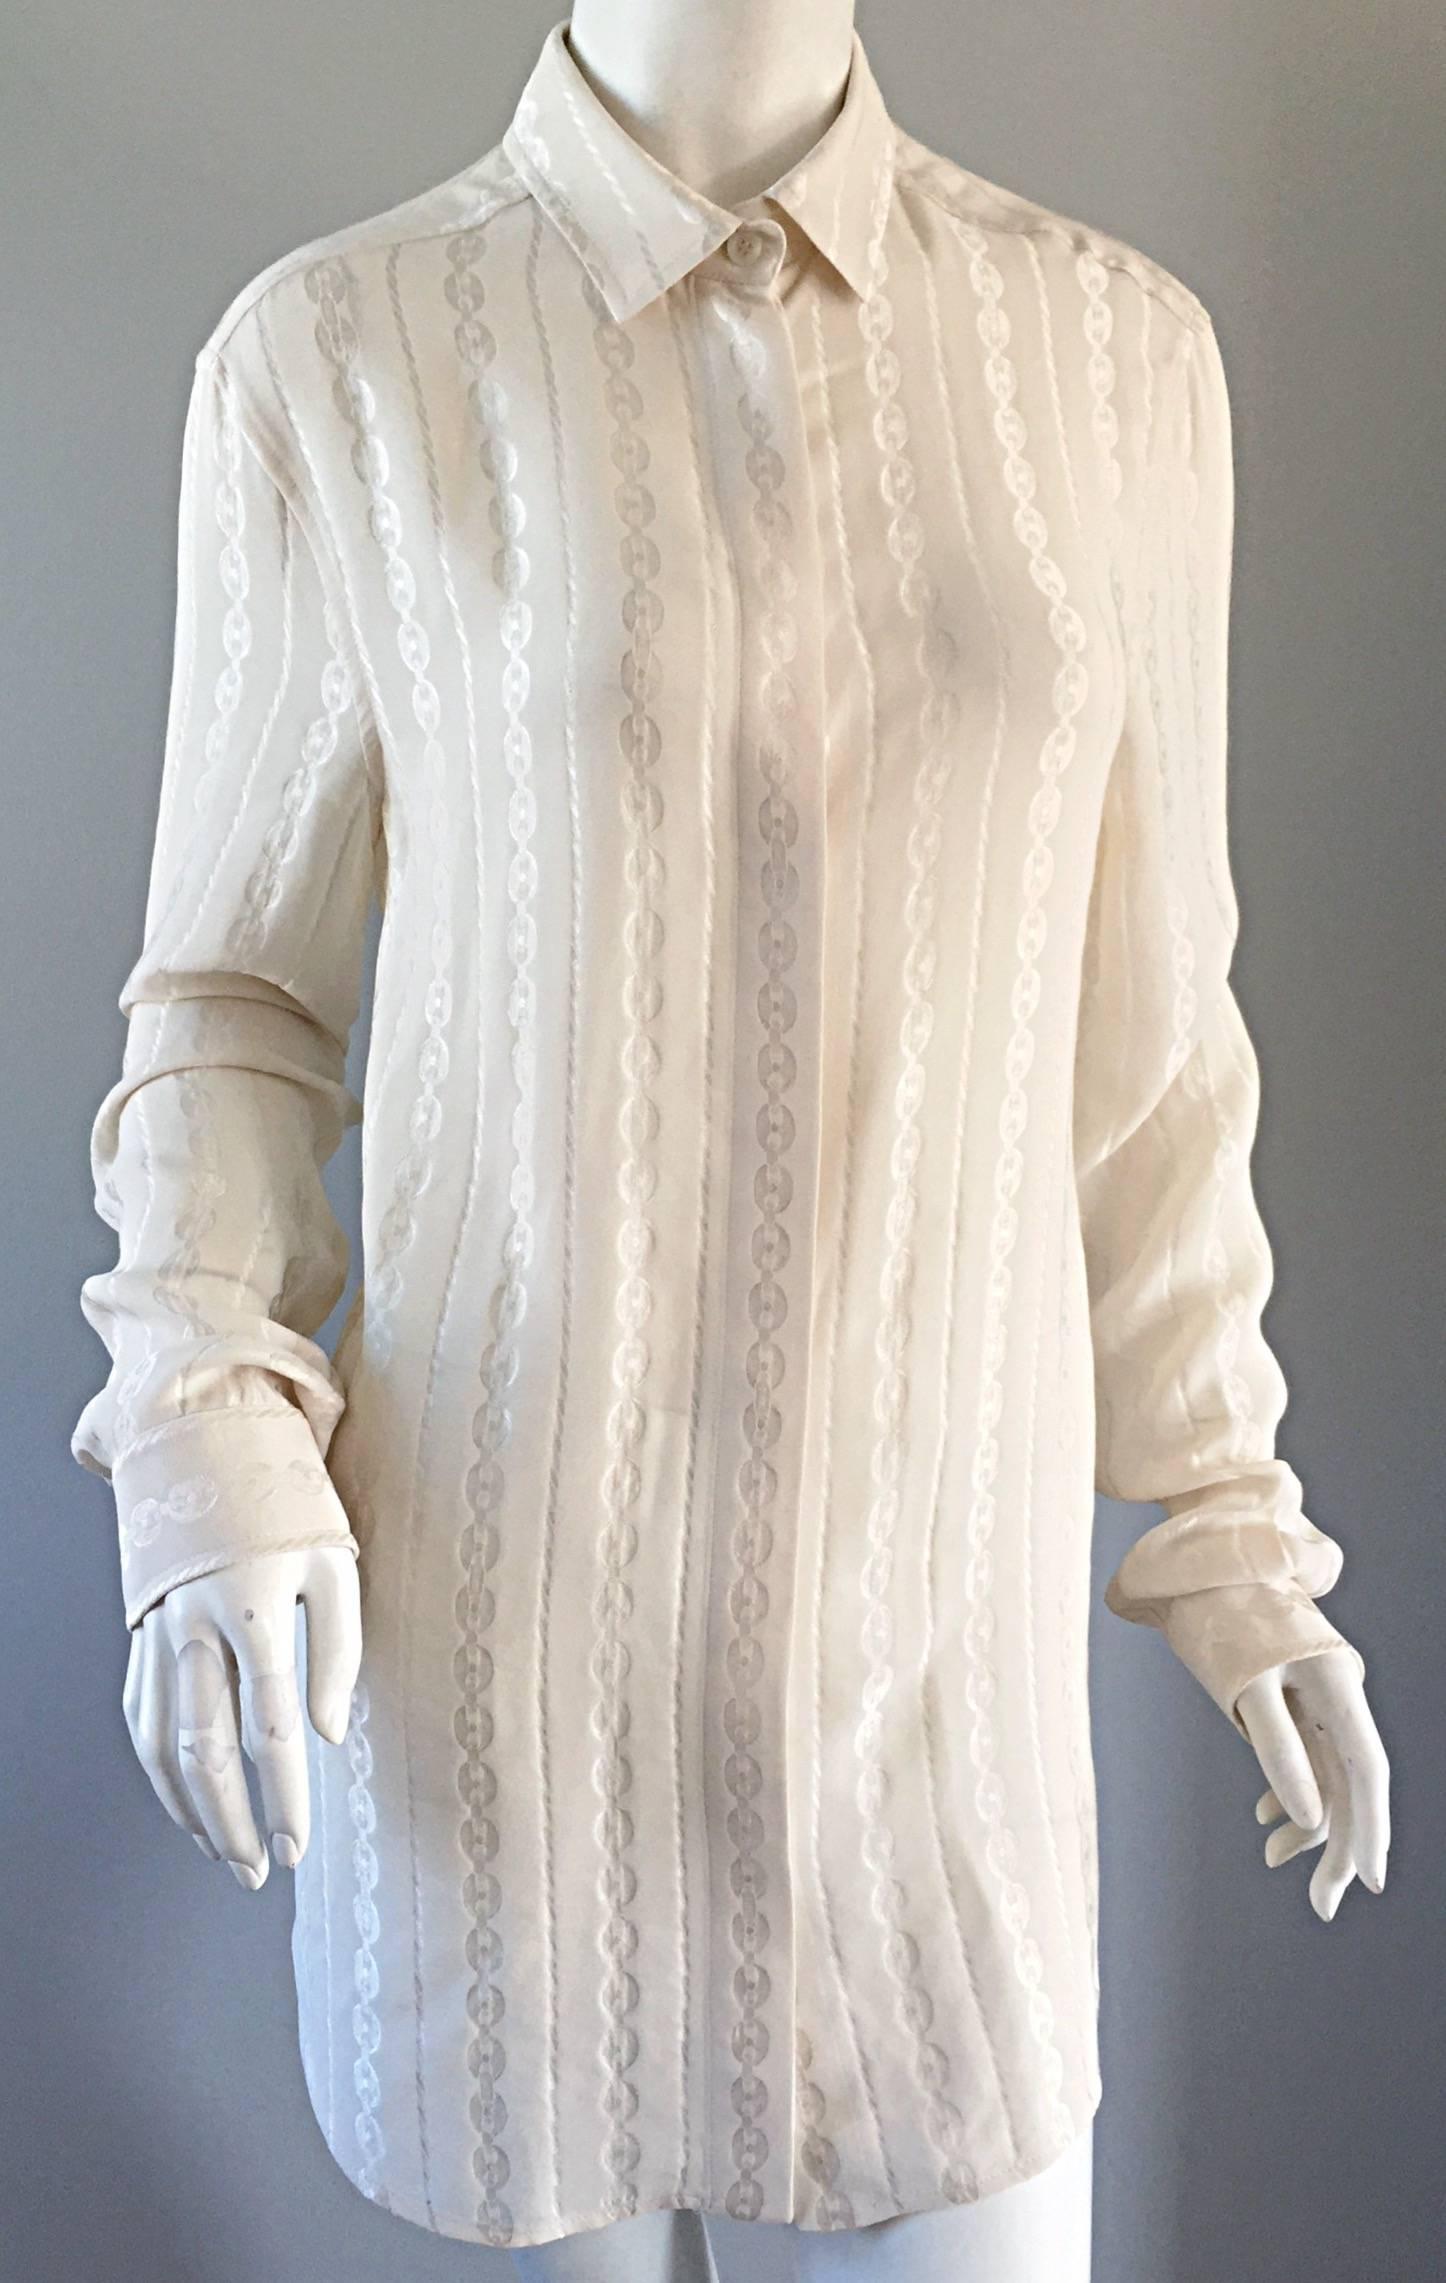 Gorgeous vintage Gucci, by Tom Ford, ivory silk long sleeve blouse. Chain / horsebit print throughout. Buttons up the bodice, with buttons at each cuff. Can easily be dressed up or down. Great with jeans, a skirt, trousers, or under a suit. In